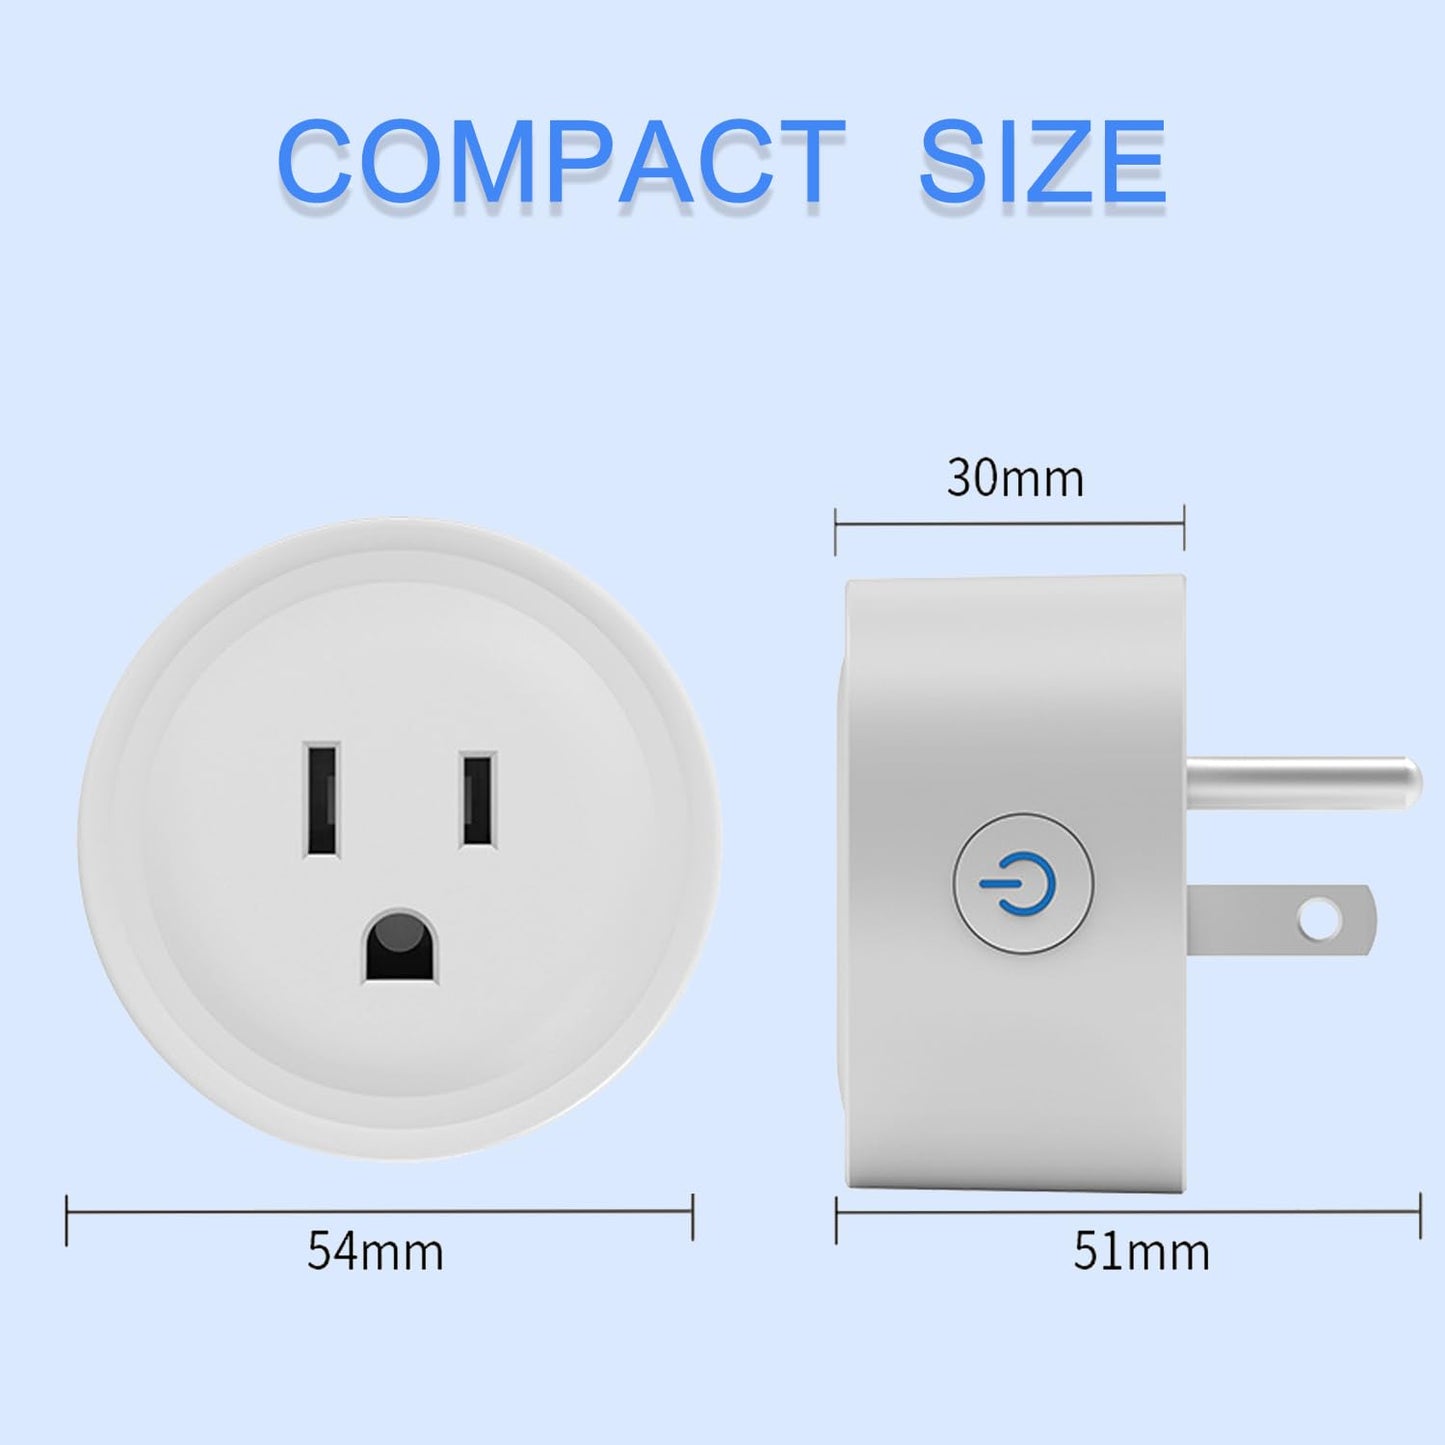 ExIoTy Smart Plug, Works with Alexa Only, Simple Setup with One Voice Command, Voice Control, Remote Control, Timer & Schedule & Group Controller, Bluetooth Mesh Outlet, Alexa Echo Required （4 Pack）